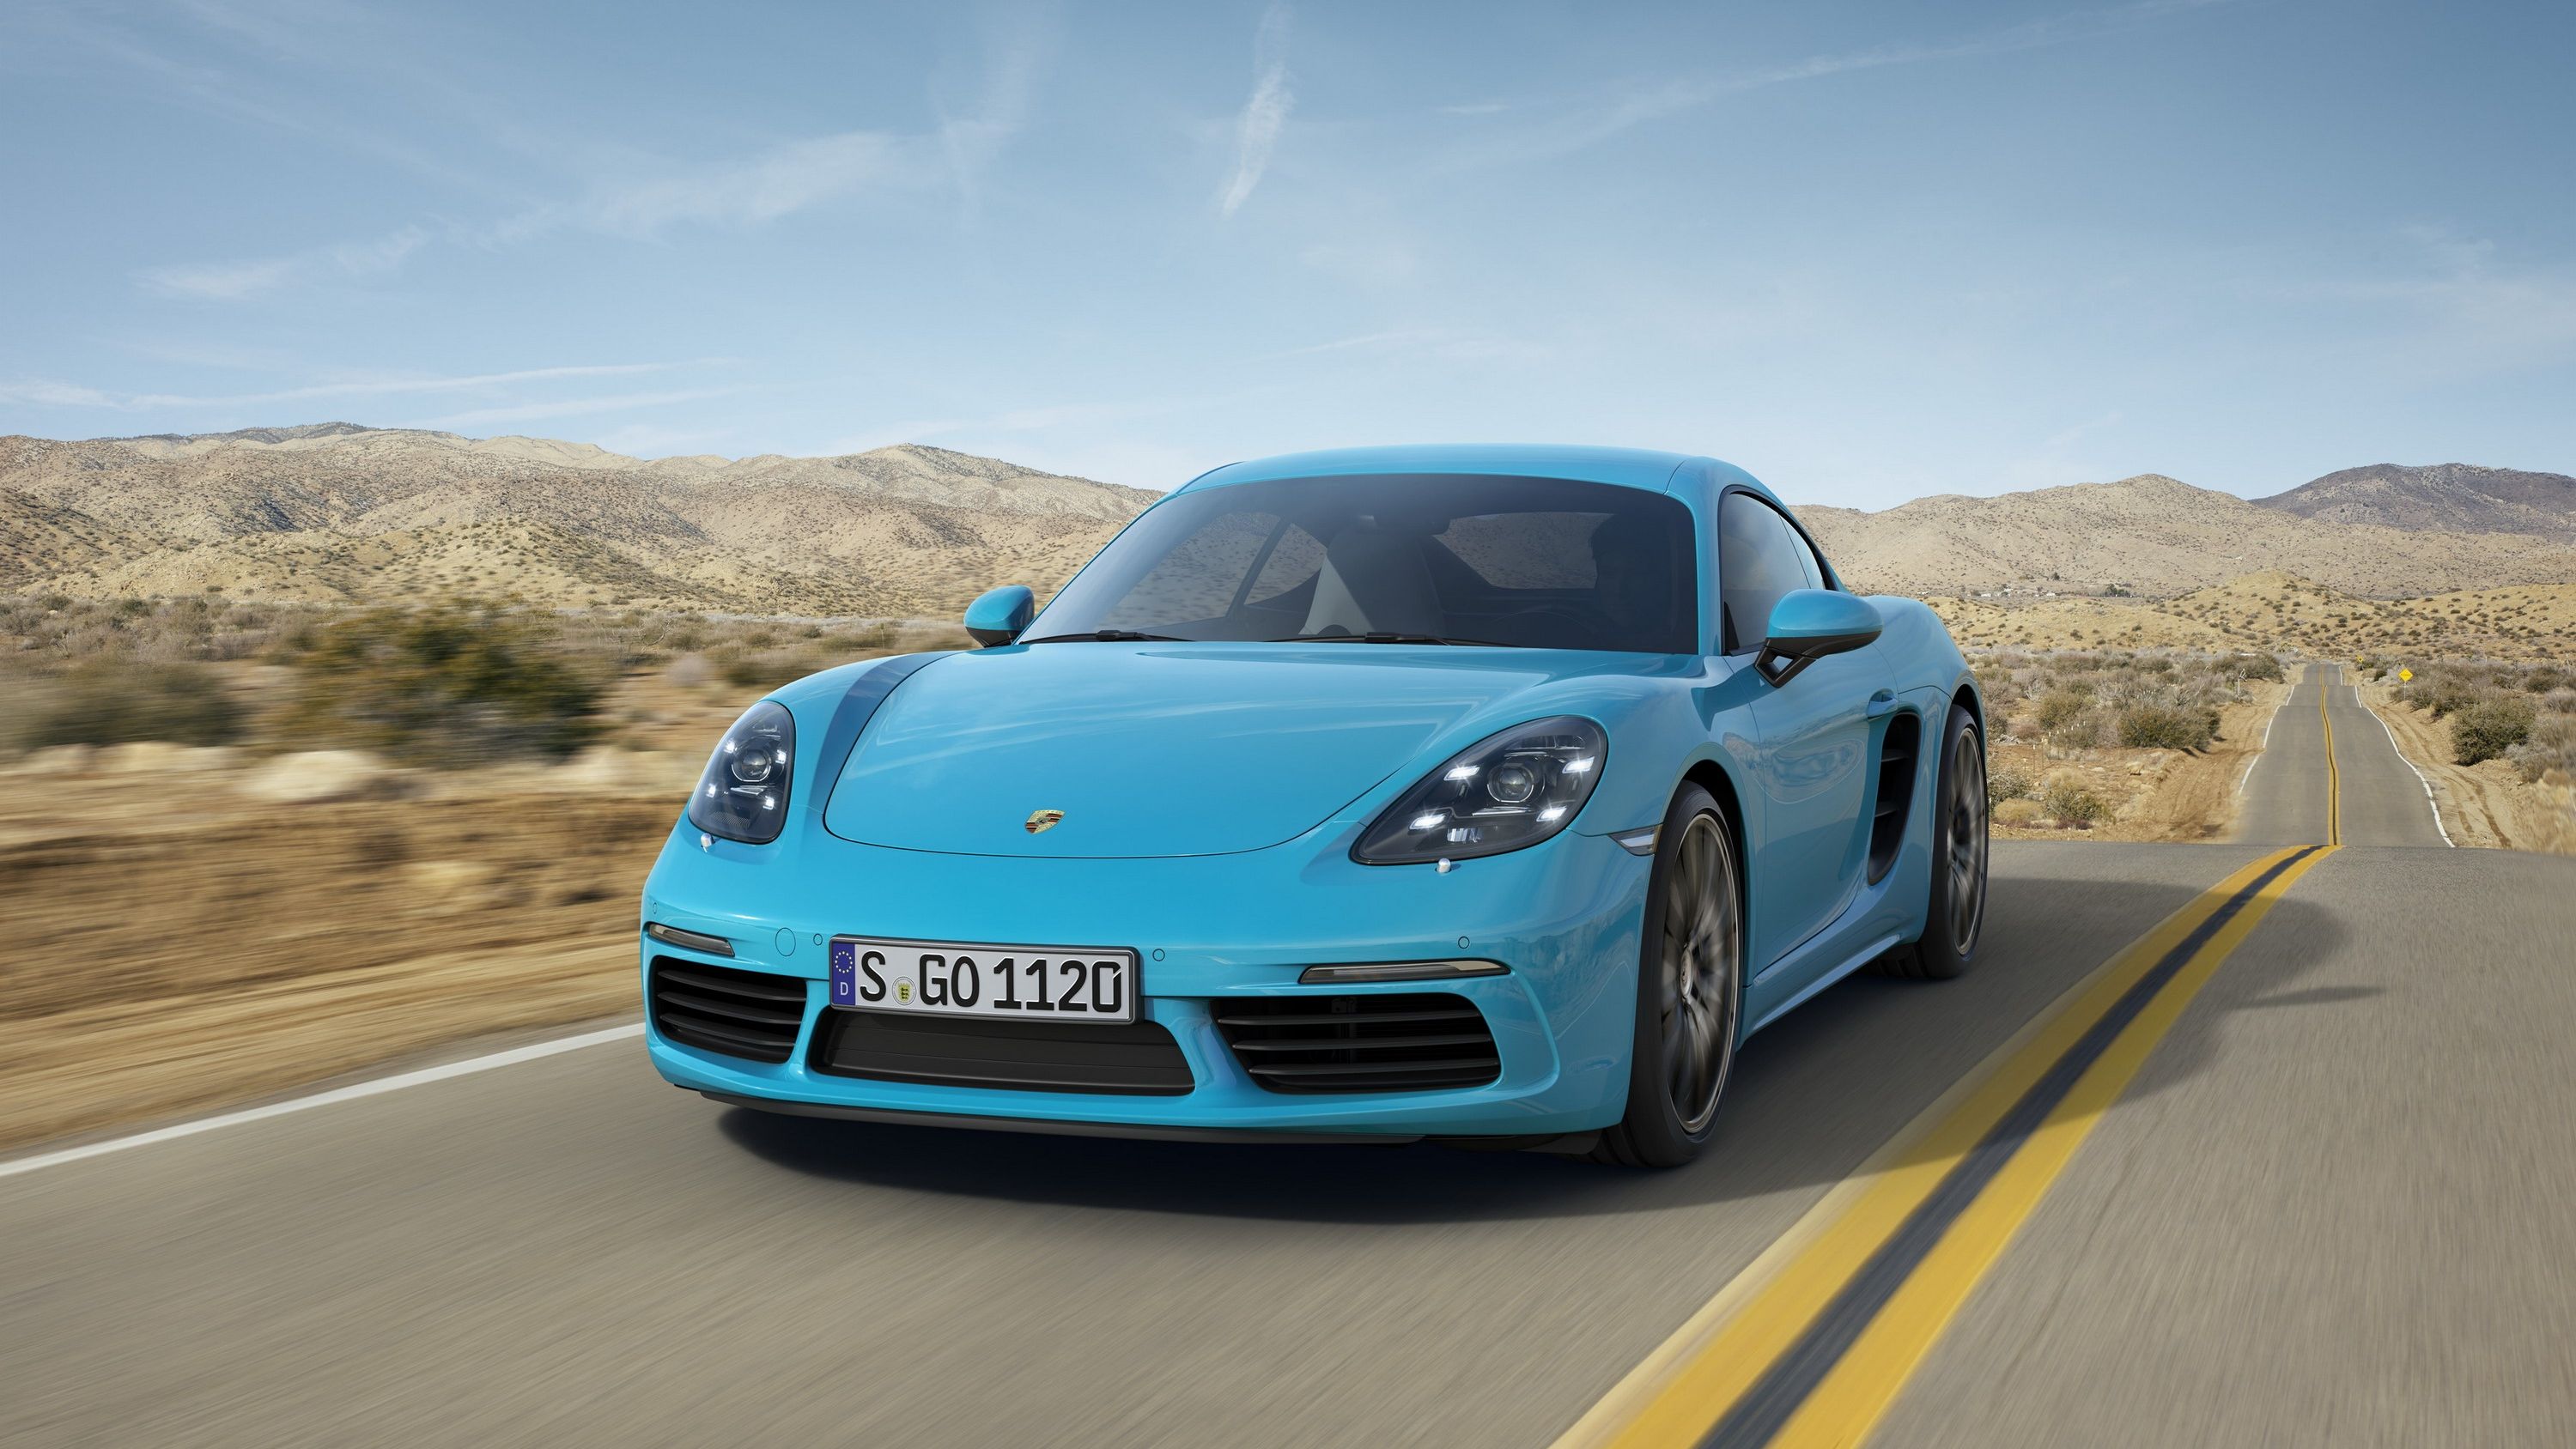 2019 The 2019 Porsche Cayman T Will Sit Between the Cayman S and GTS with More Power and Less Weight 